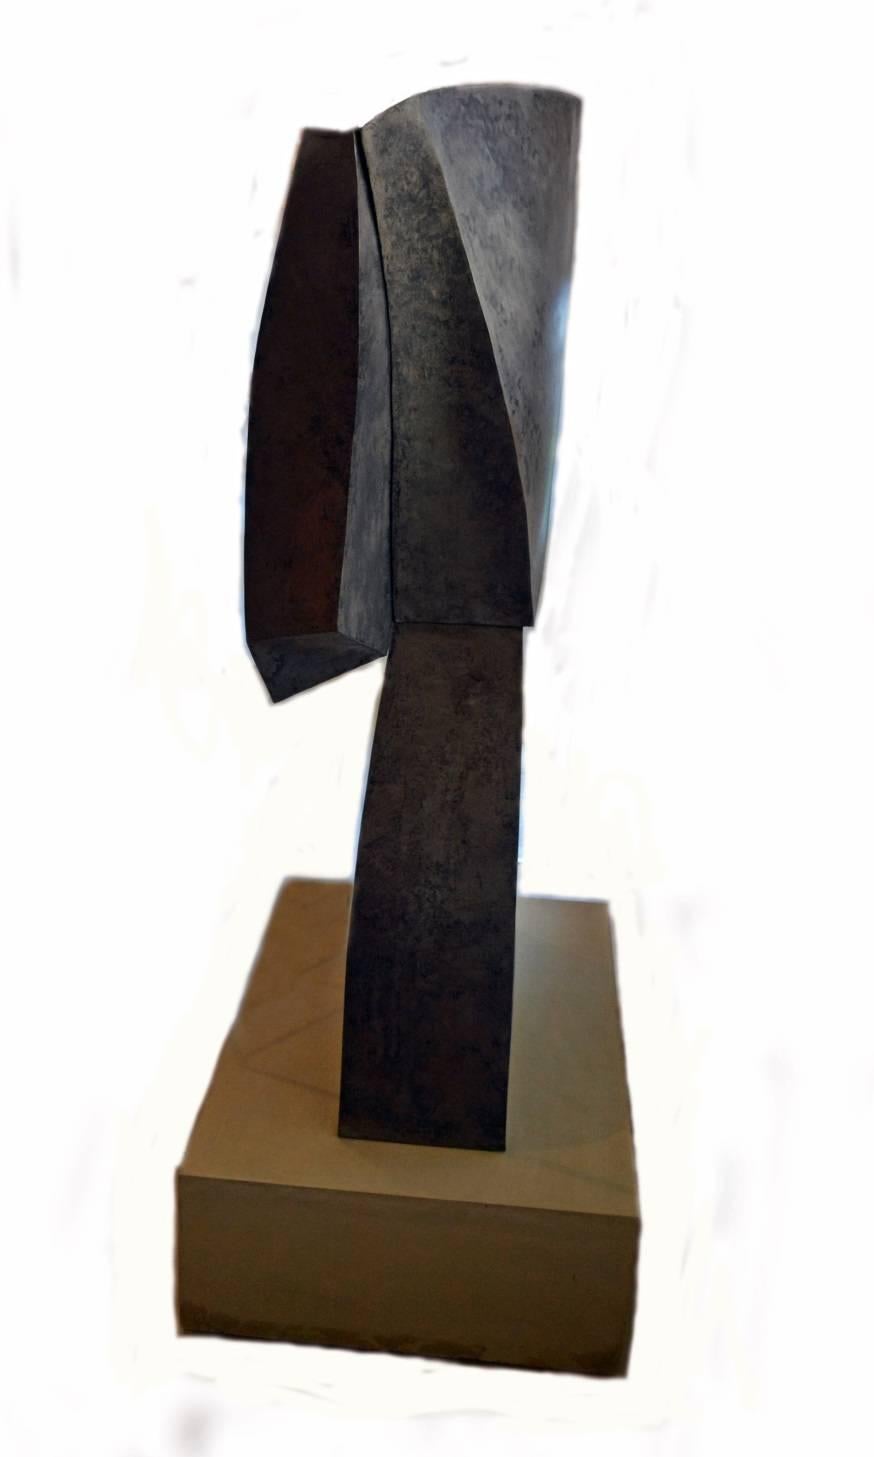 California artist Scott Donadio (b. 1961), handcrafted various shapes out of steel and welded them together to create this beautiful abstract sculpture that stands over five feet tall. It rests on a twelve inch tall custom concrete base and secured